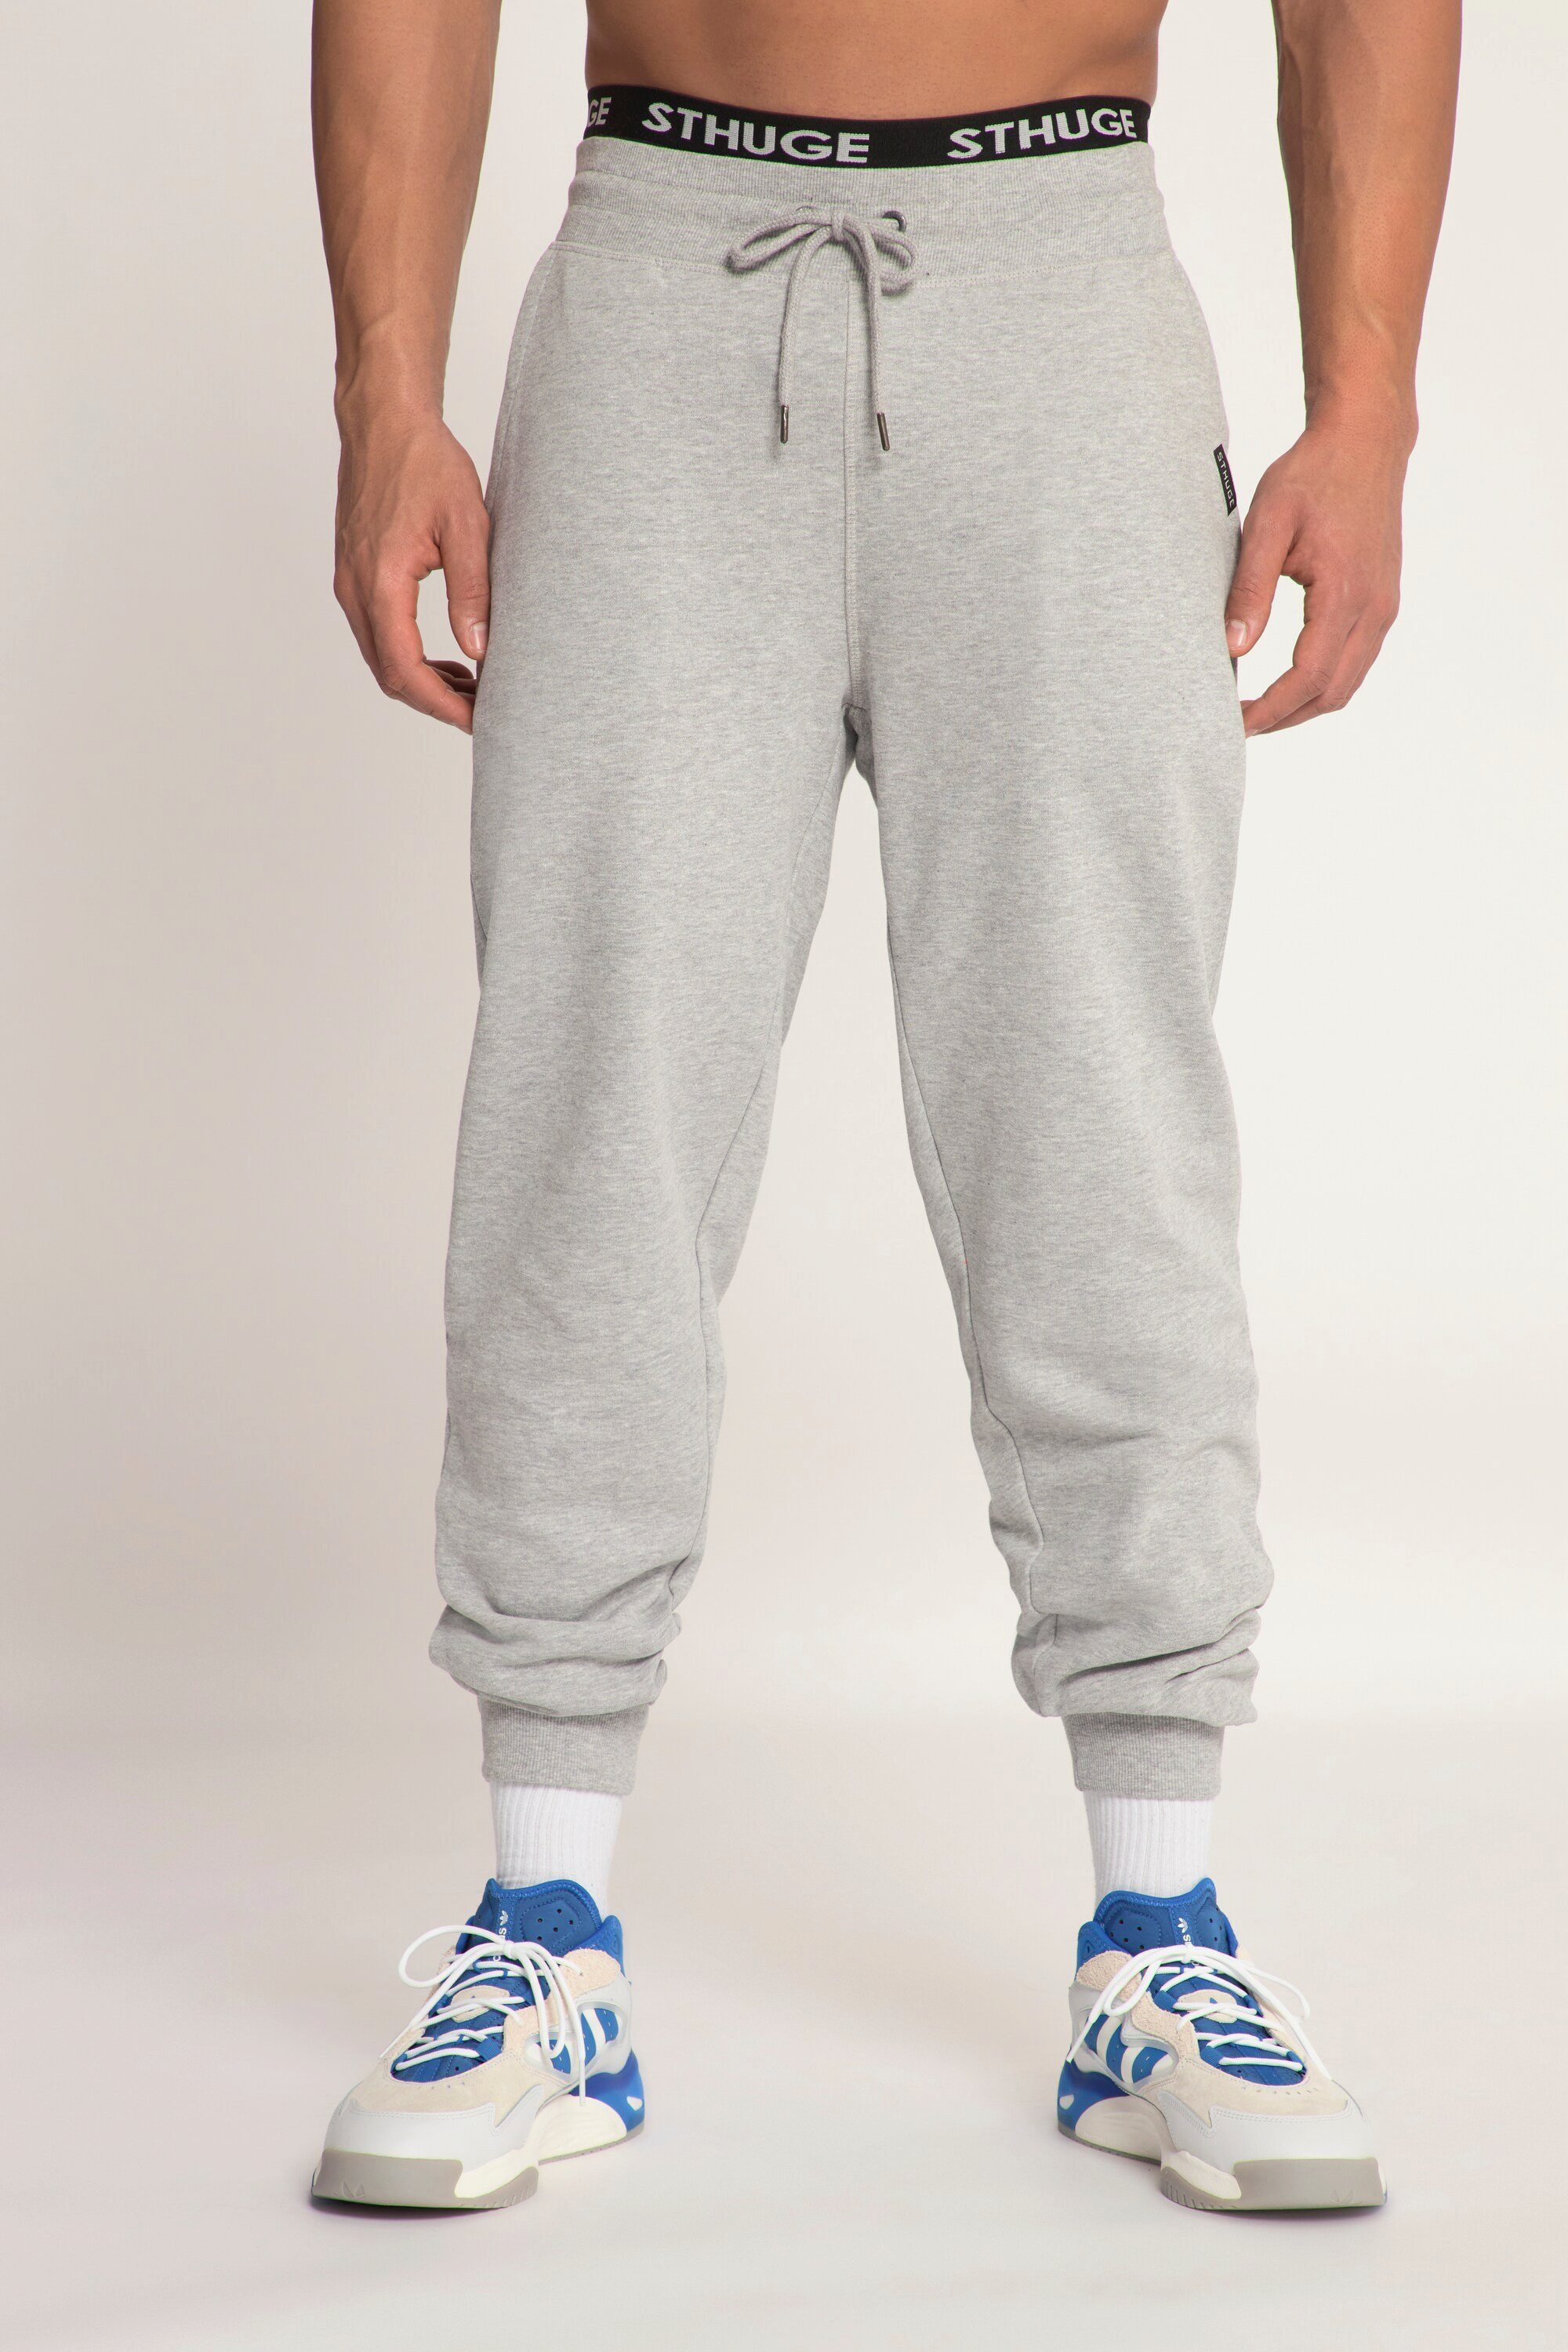 STHUGE Sweathose STHUGE Jogginghose mit Taschen Relaxed Fit